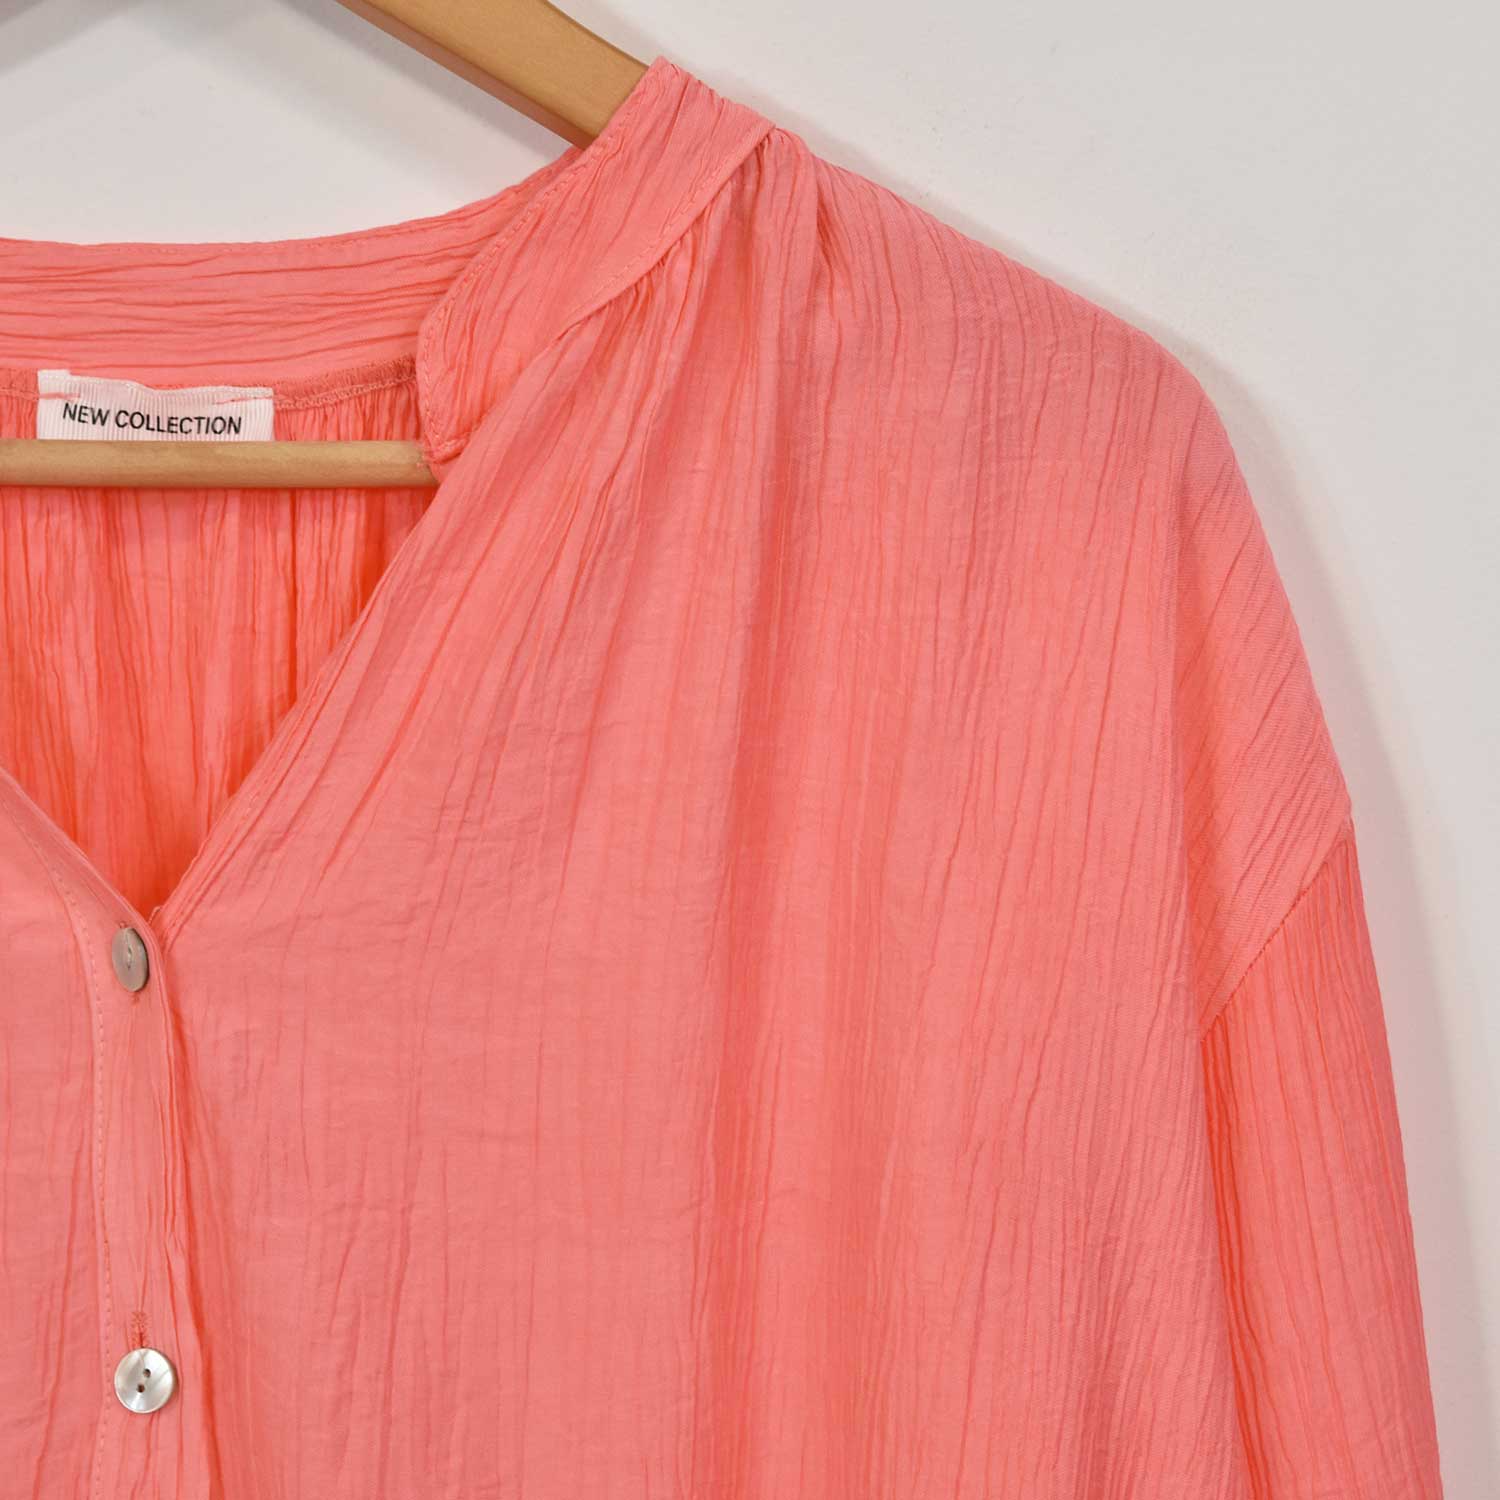 Coral ruffled blouse